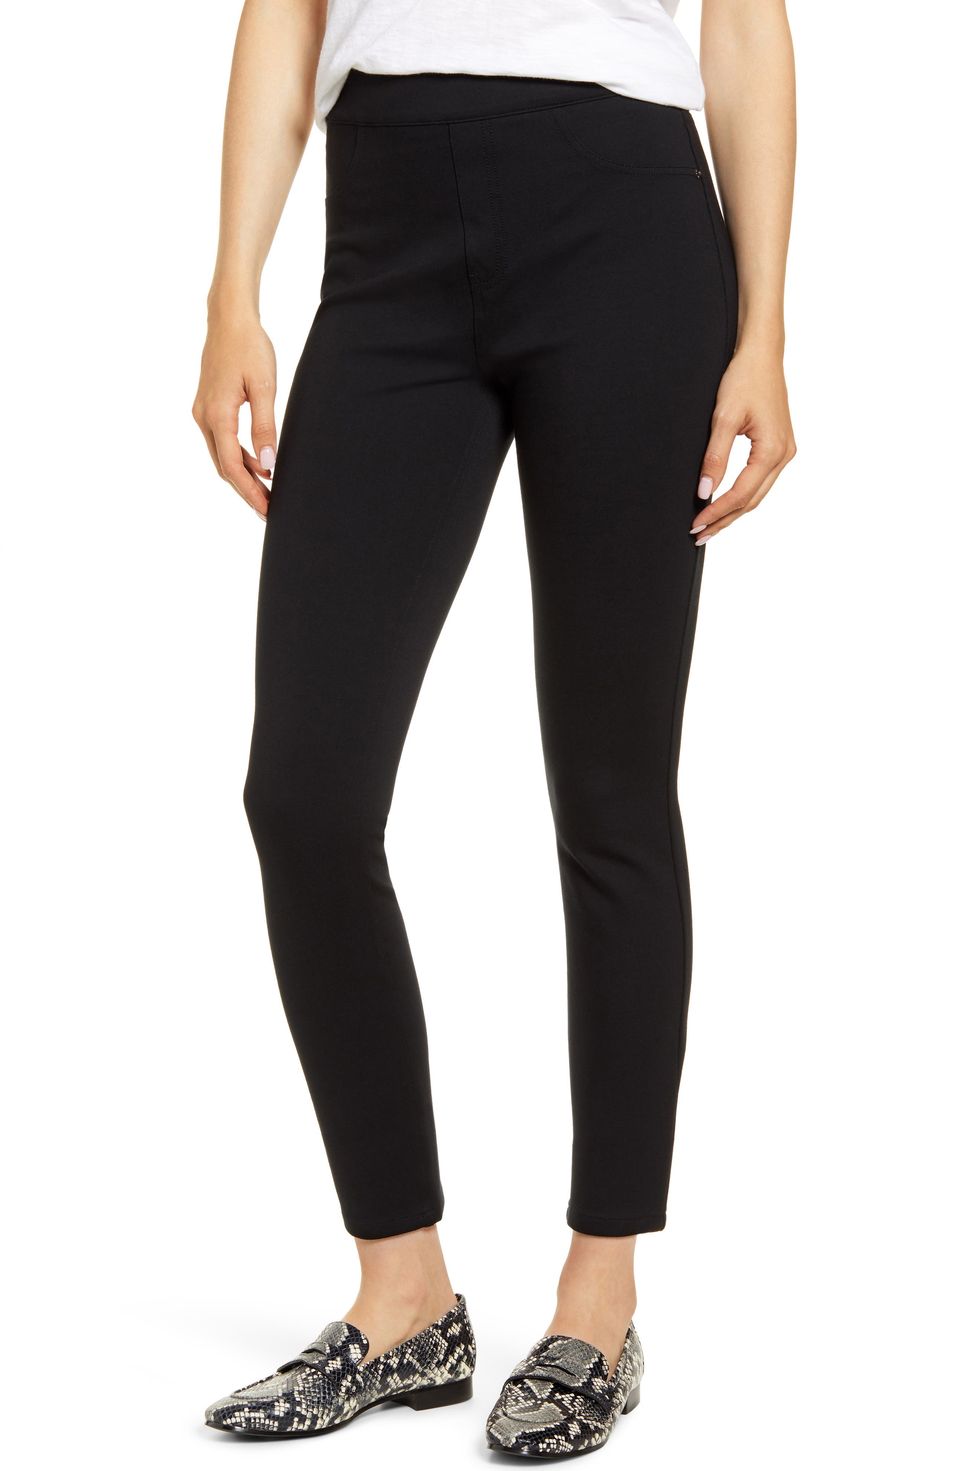 Oprah's Favorite Spanx Perfect Pants Now Come In Navy